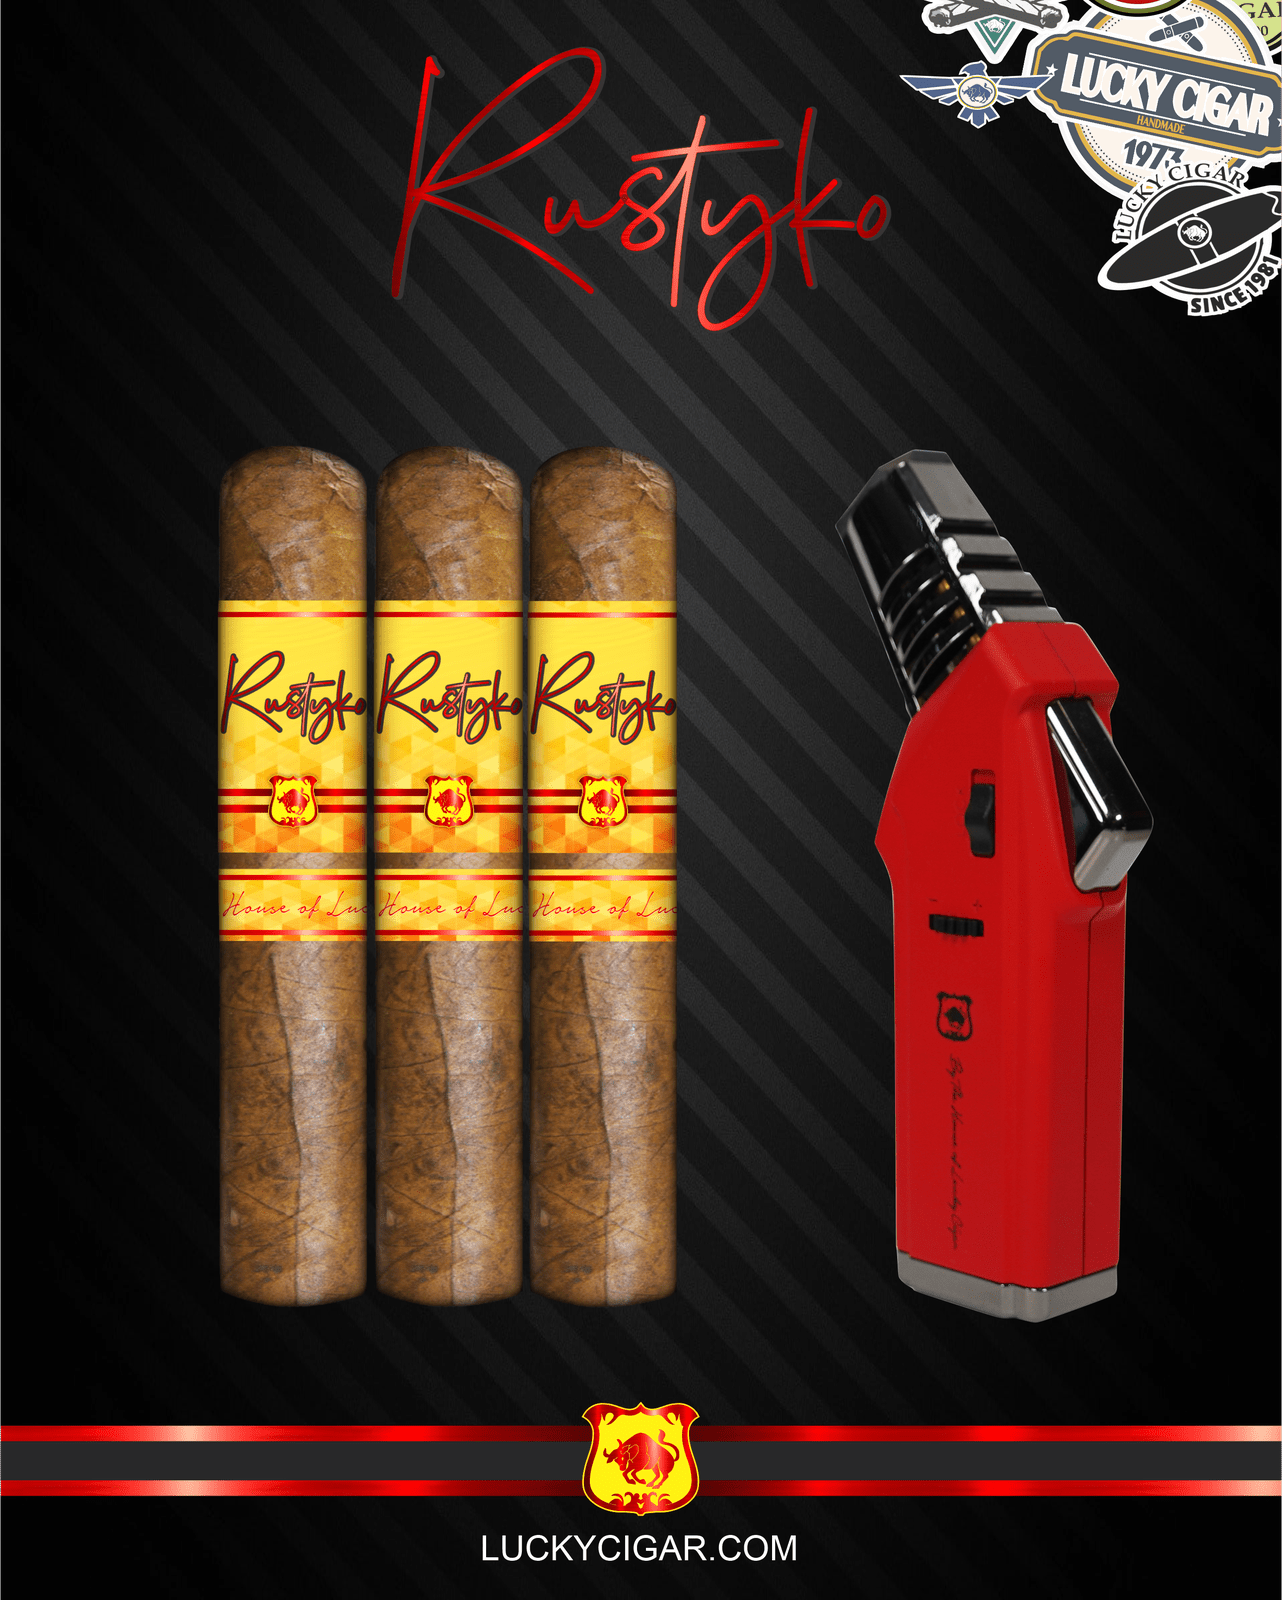 Infused Cigars: Rustyko Robusto 5x54 Cigars - Set of 3 with Red Torch Lighter